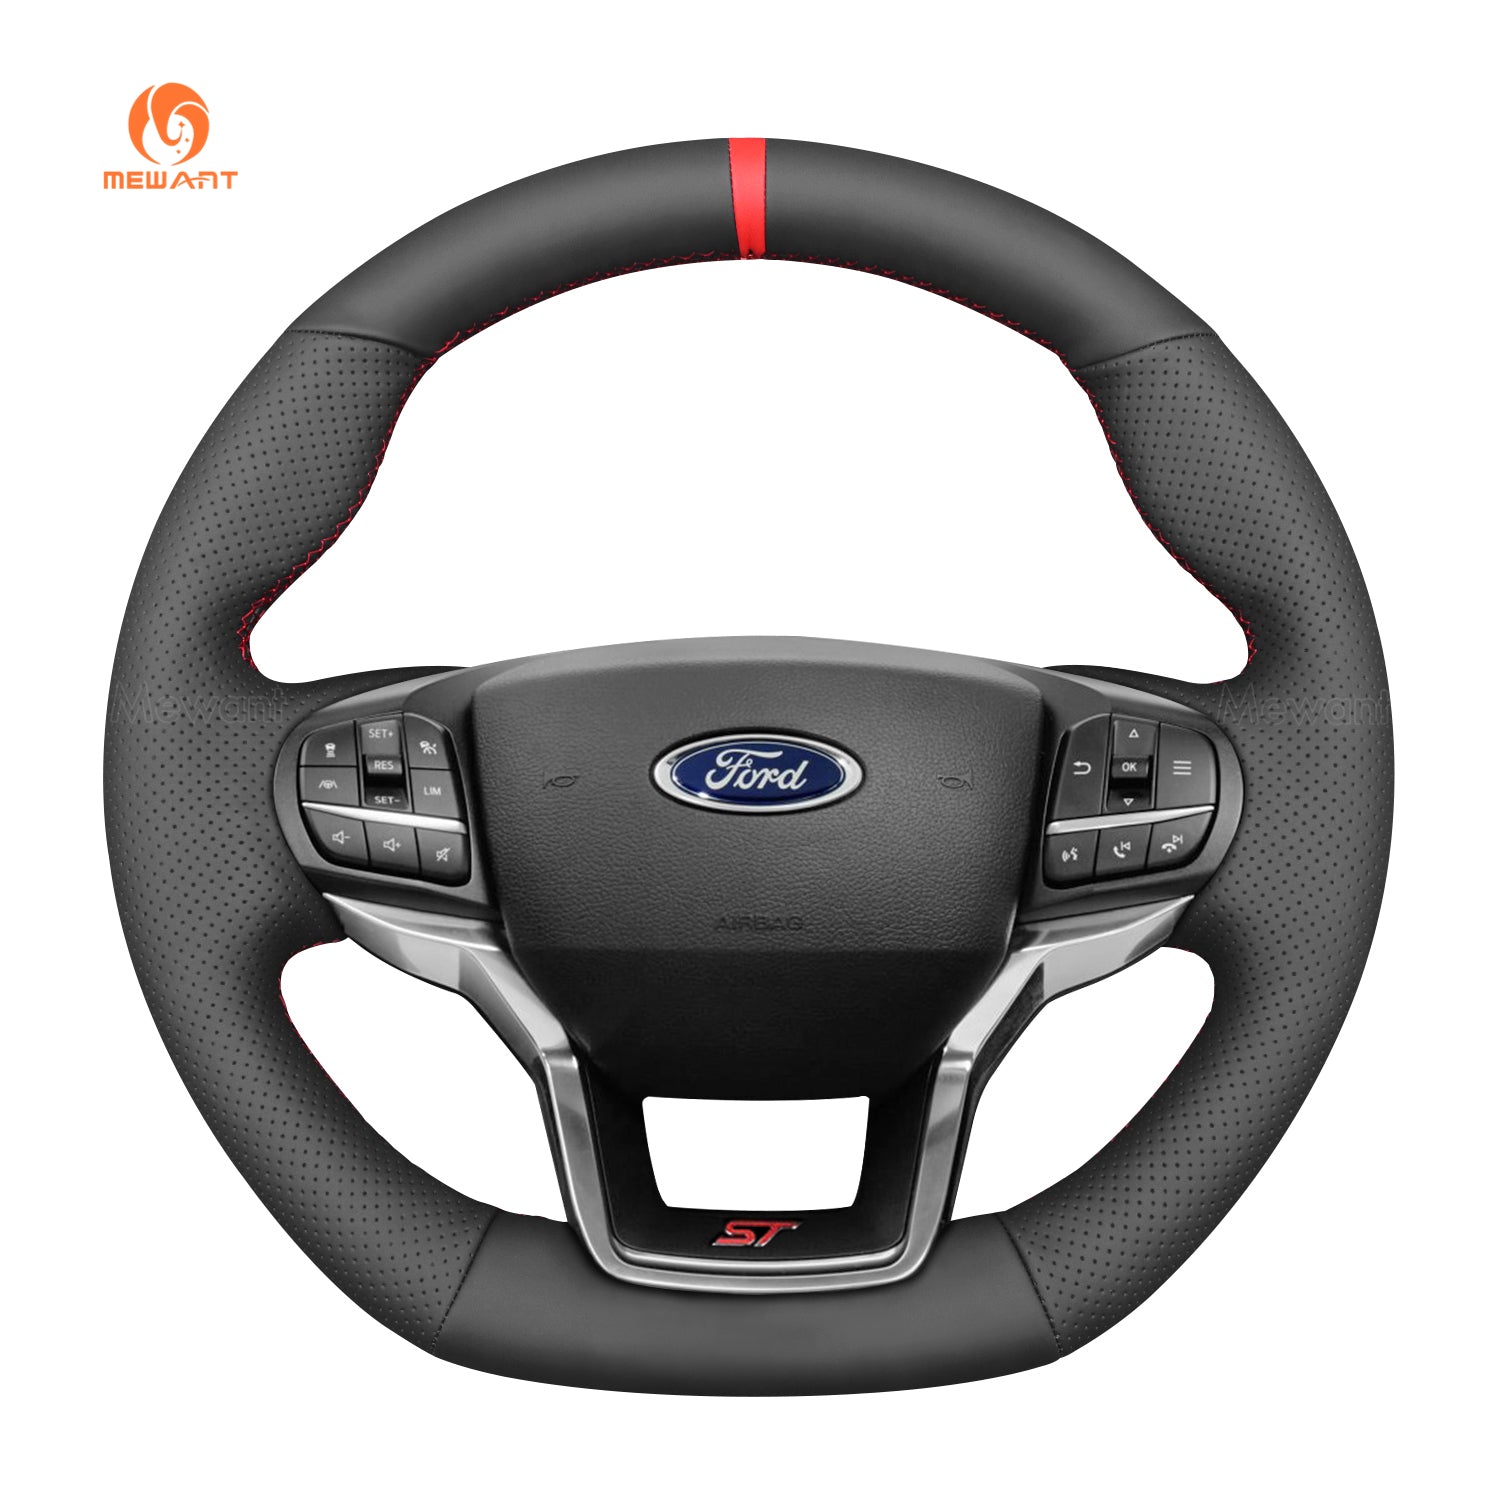 MEWANT Car Steering Wheel Cover for Ford Ford Explorer (ST/ST-Line/Timberline)